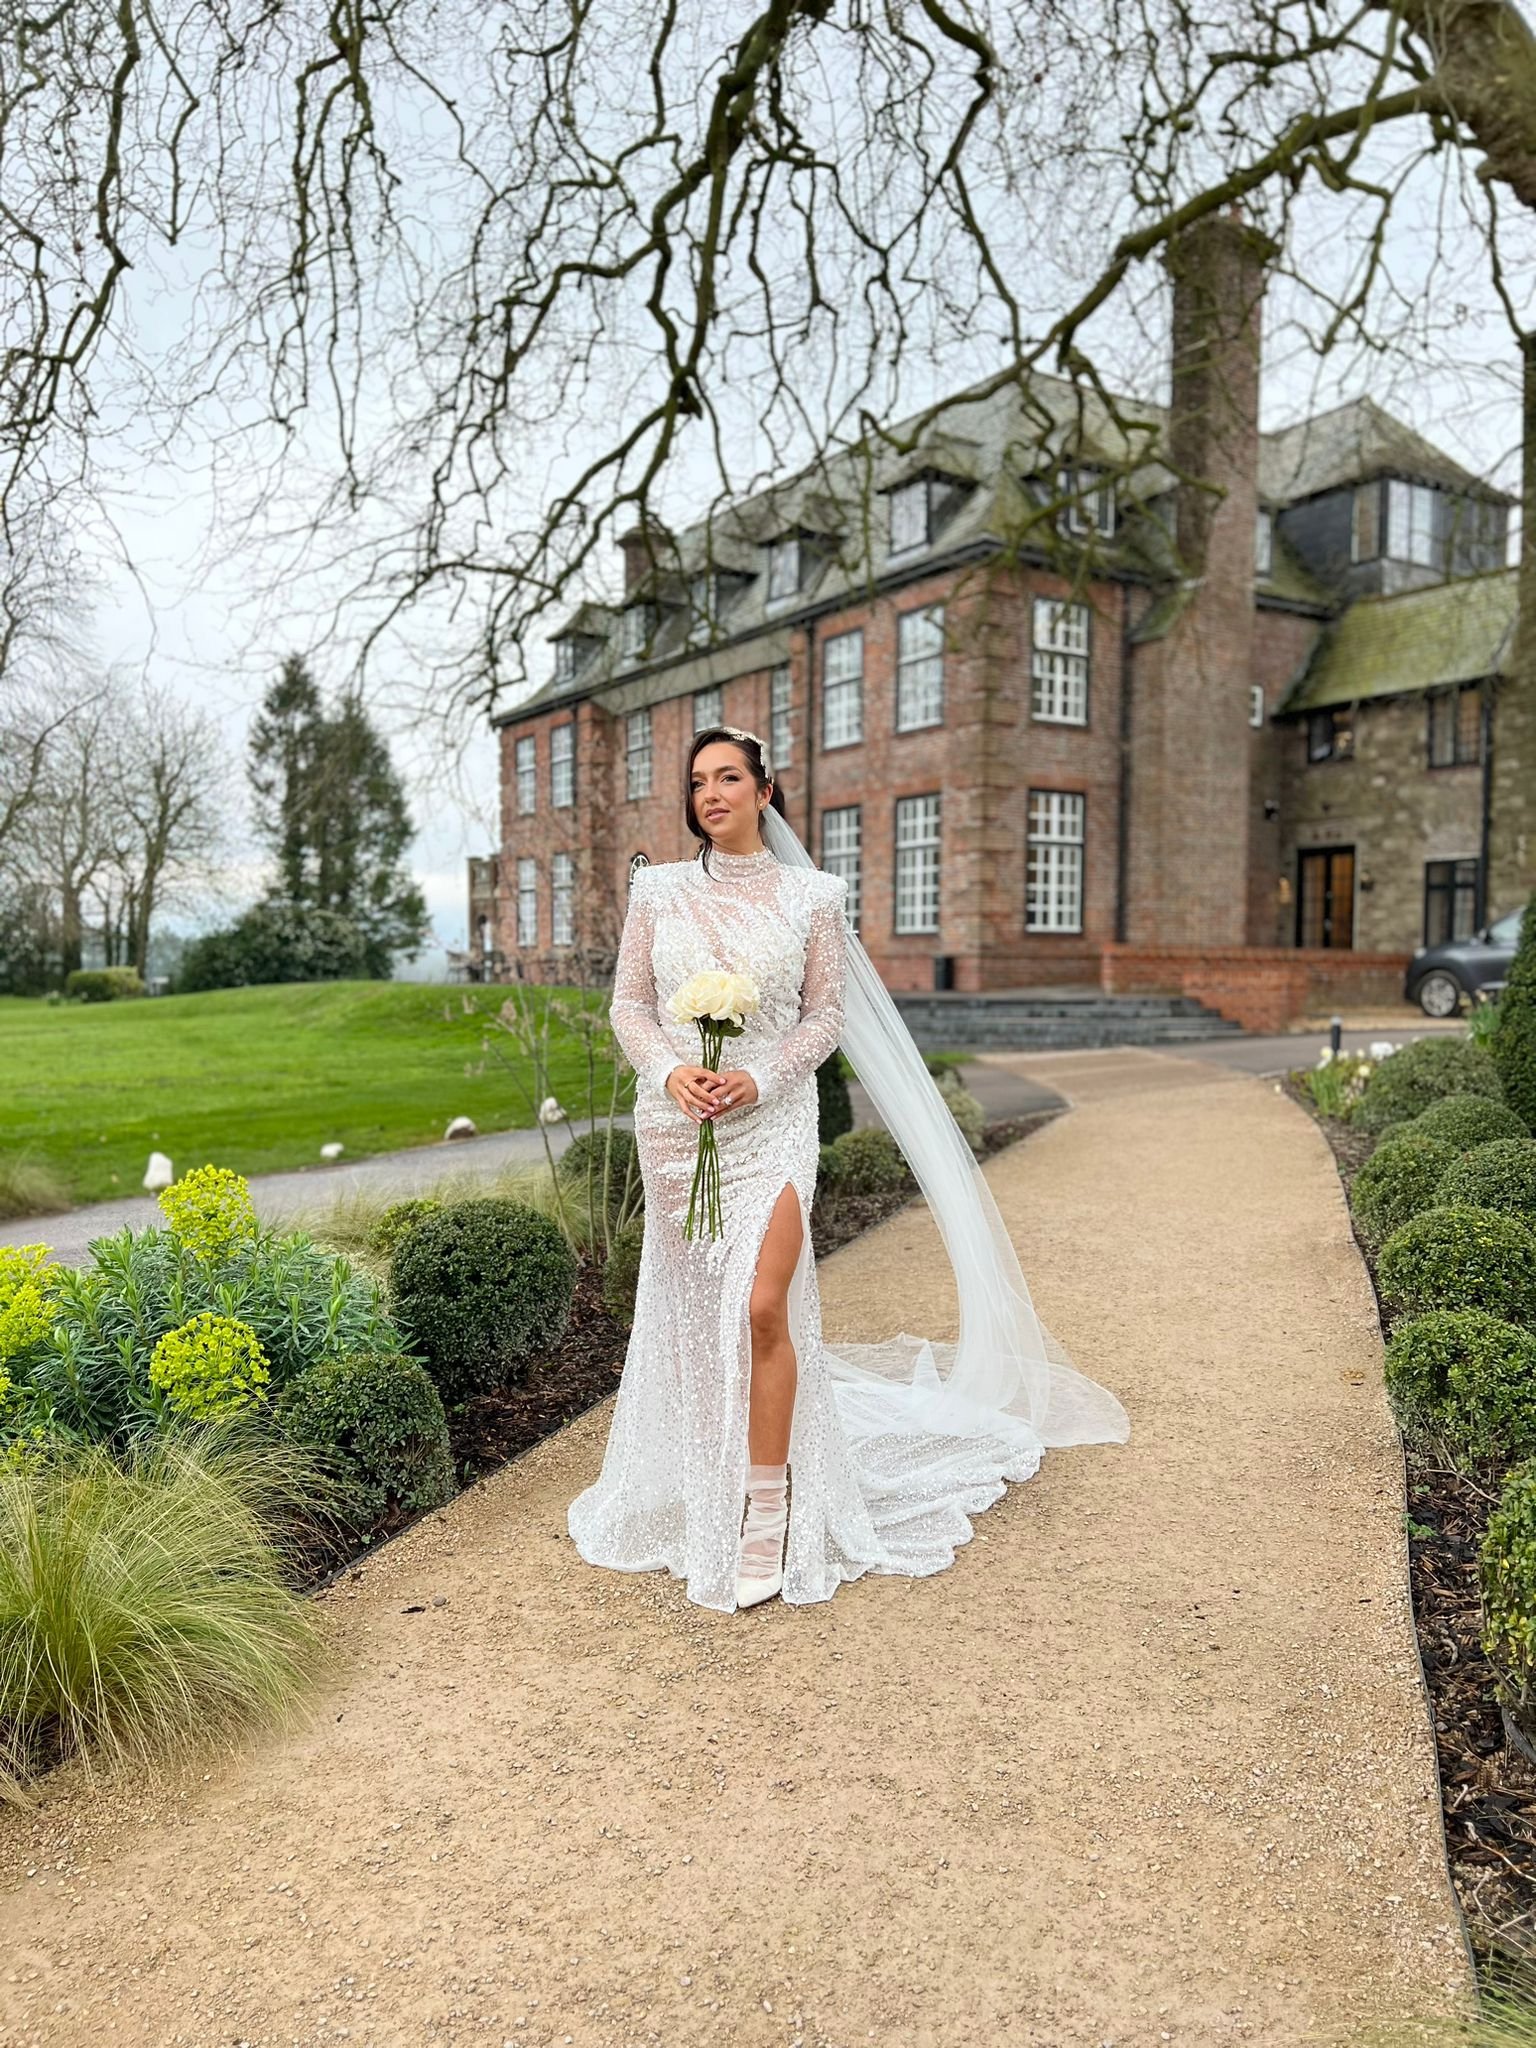  The bride is stood outside in the grounds in front of a grand building. The modern bride is wearing a long, sparkly white wedding dress with long sleeves and a thigh high split at the front along with white ankle boots. The sleek design of the white